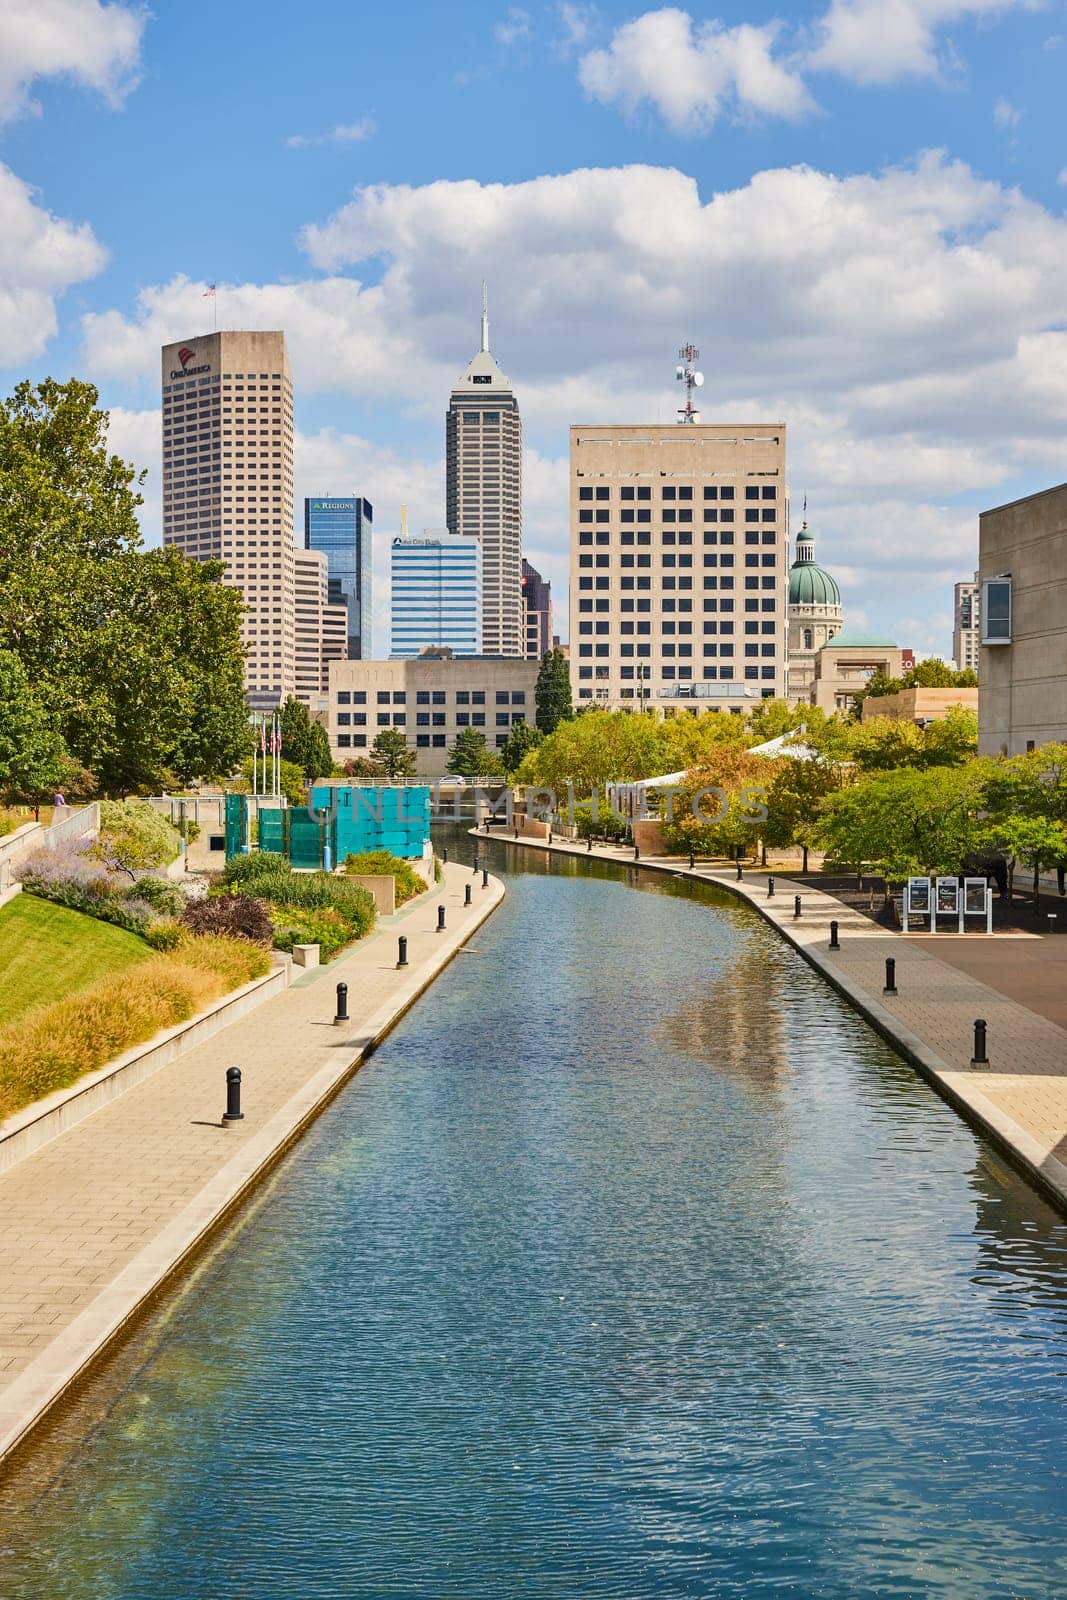 Sunny Day in Indianapolis - A Tranquil Canal Reflecting Dynamic Skyline with Modern and Historic Architecture, 2023